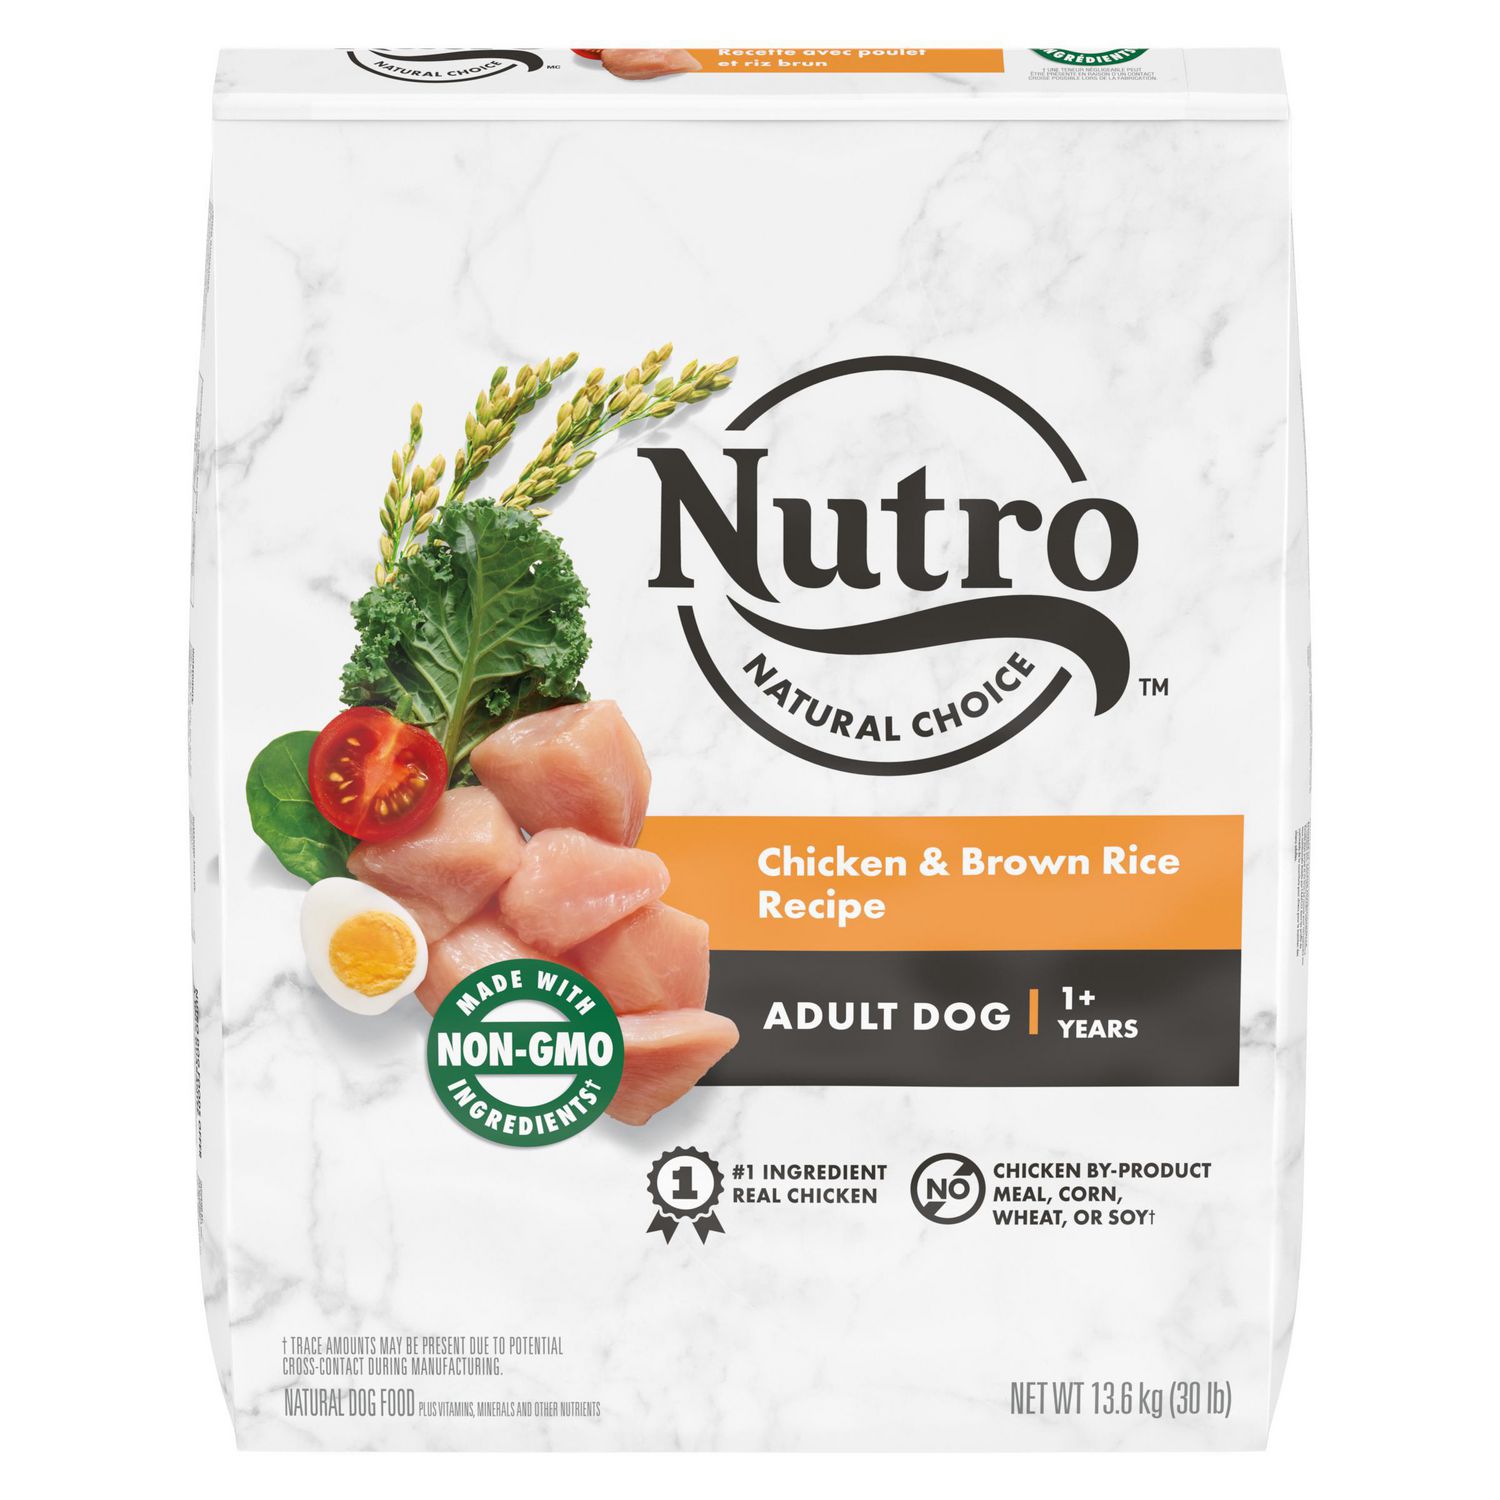 Nutro Natural Choice Chicken  Brown Rice Recipe Dry Dog Food, 2.27-13.6kg 